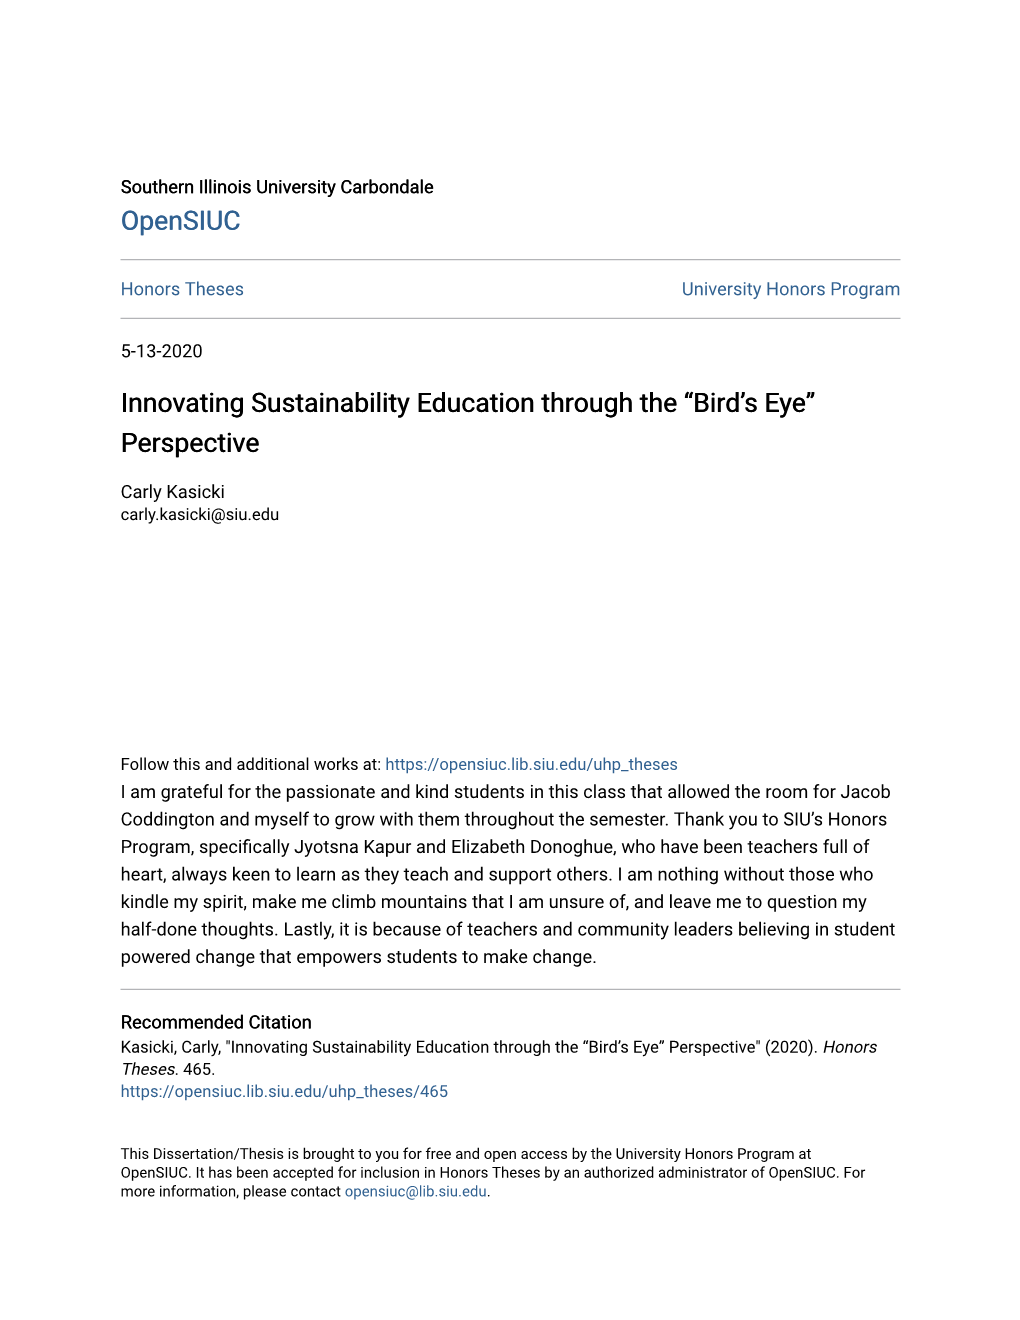 Innovating Sustainability Education Through the “Bird’S Eye” Perspective